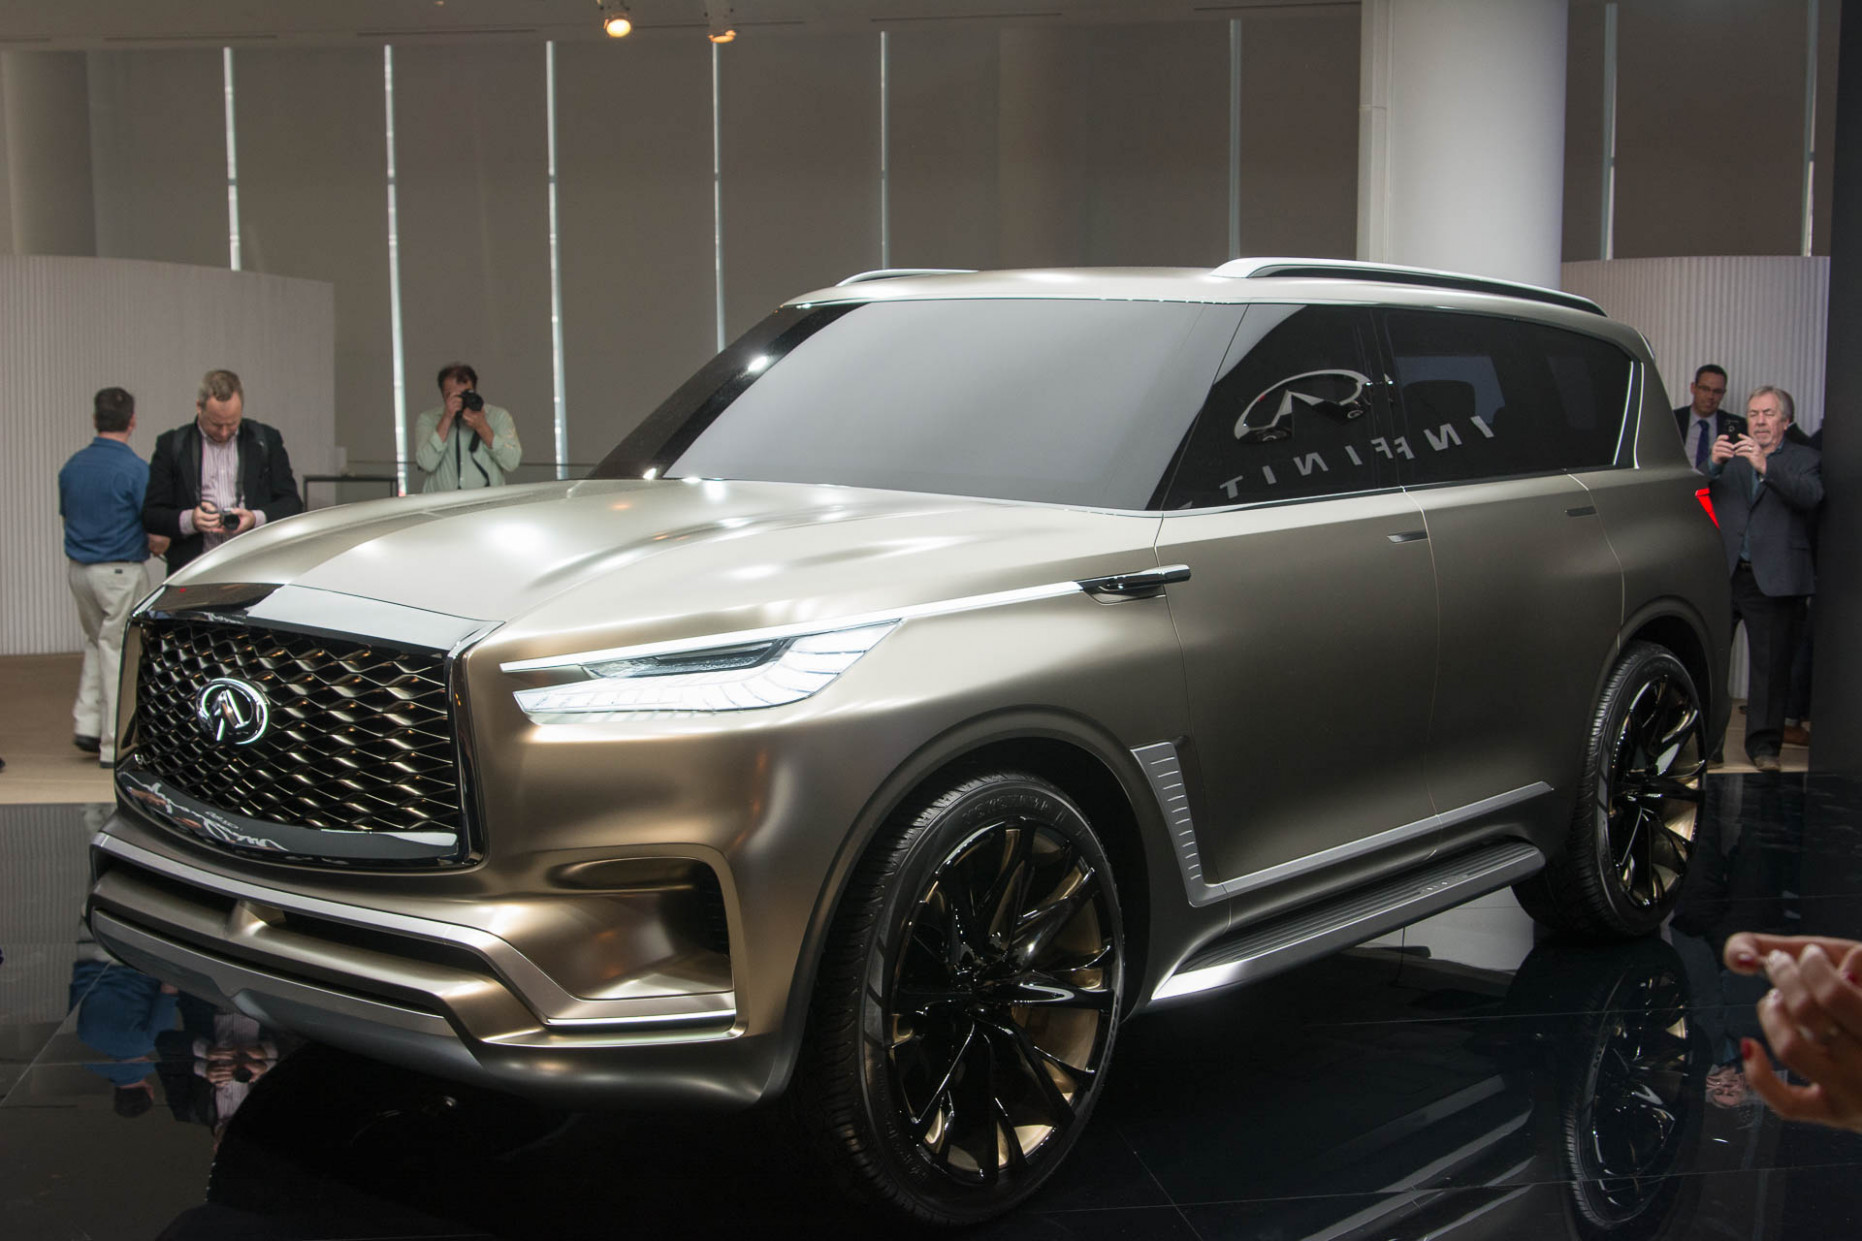 Reviews When Does The 2023 Infiniti Qx80 Come Out